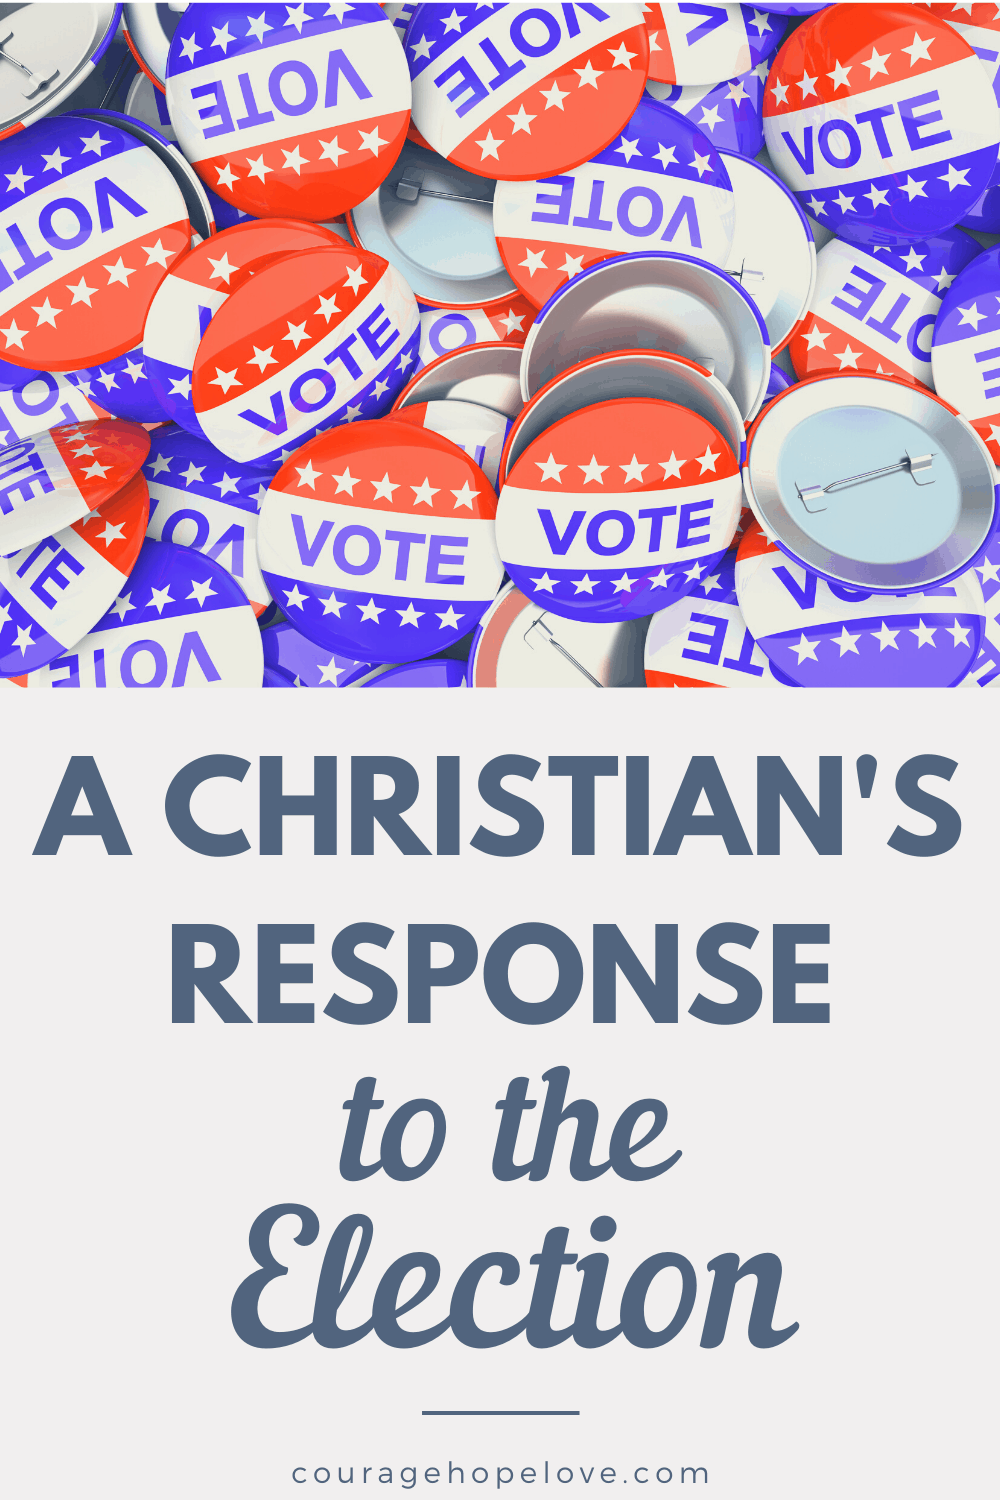 A Christian's Response to the Election